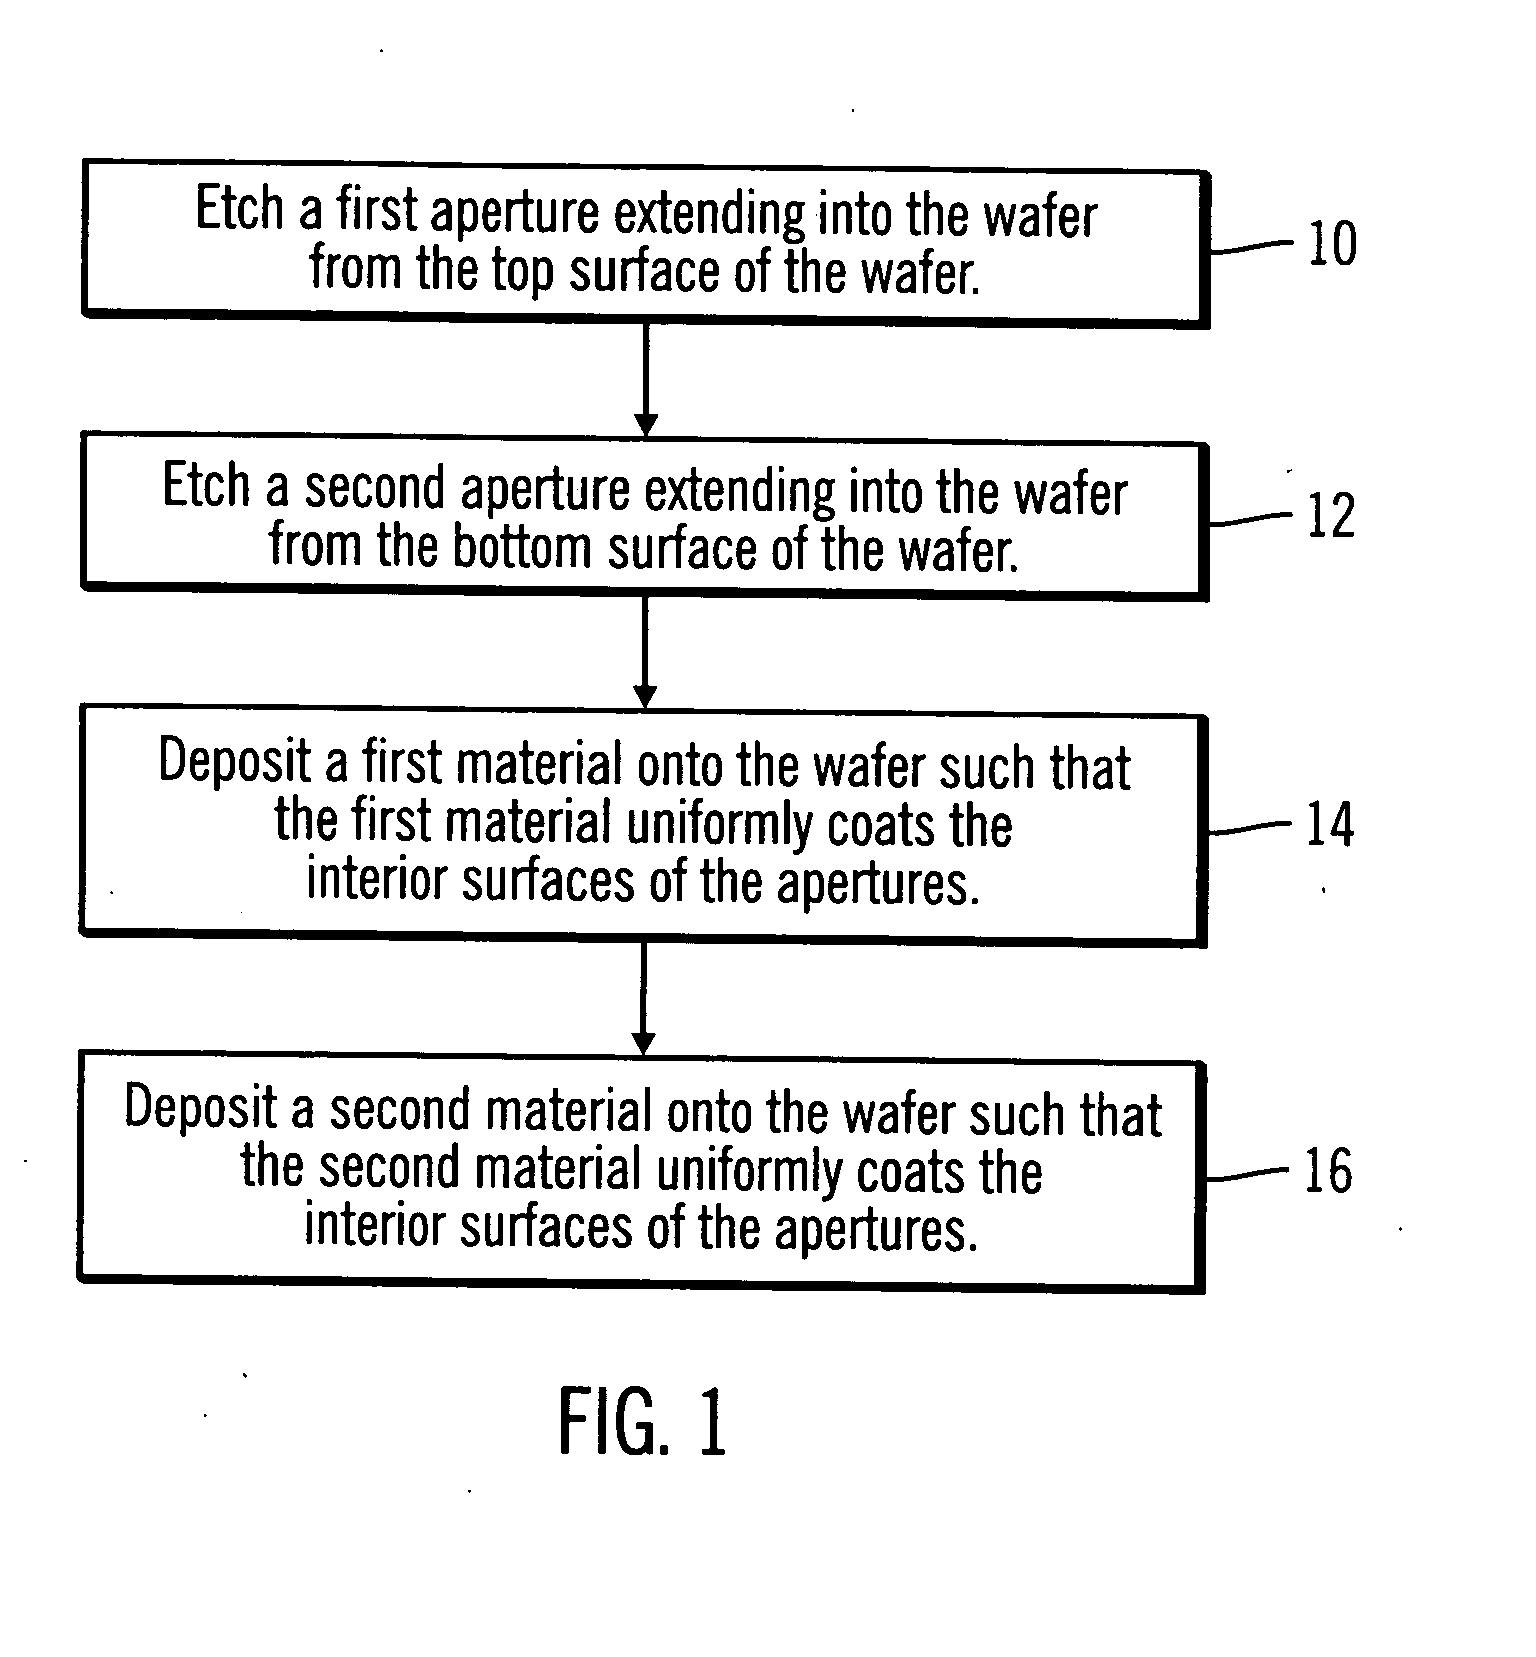 Low temperature method for fabricating high-aspect ratio vias and devices fabricated by said method